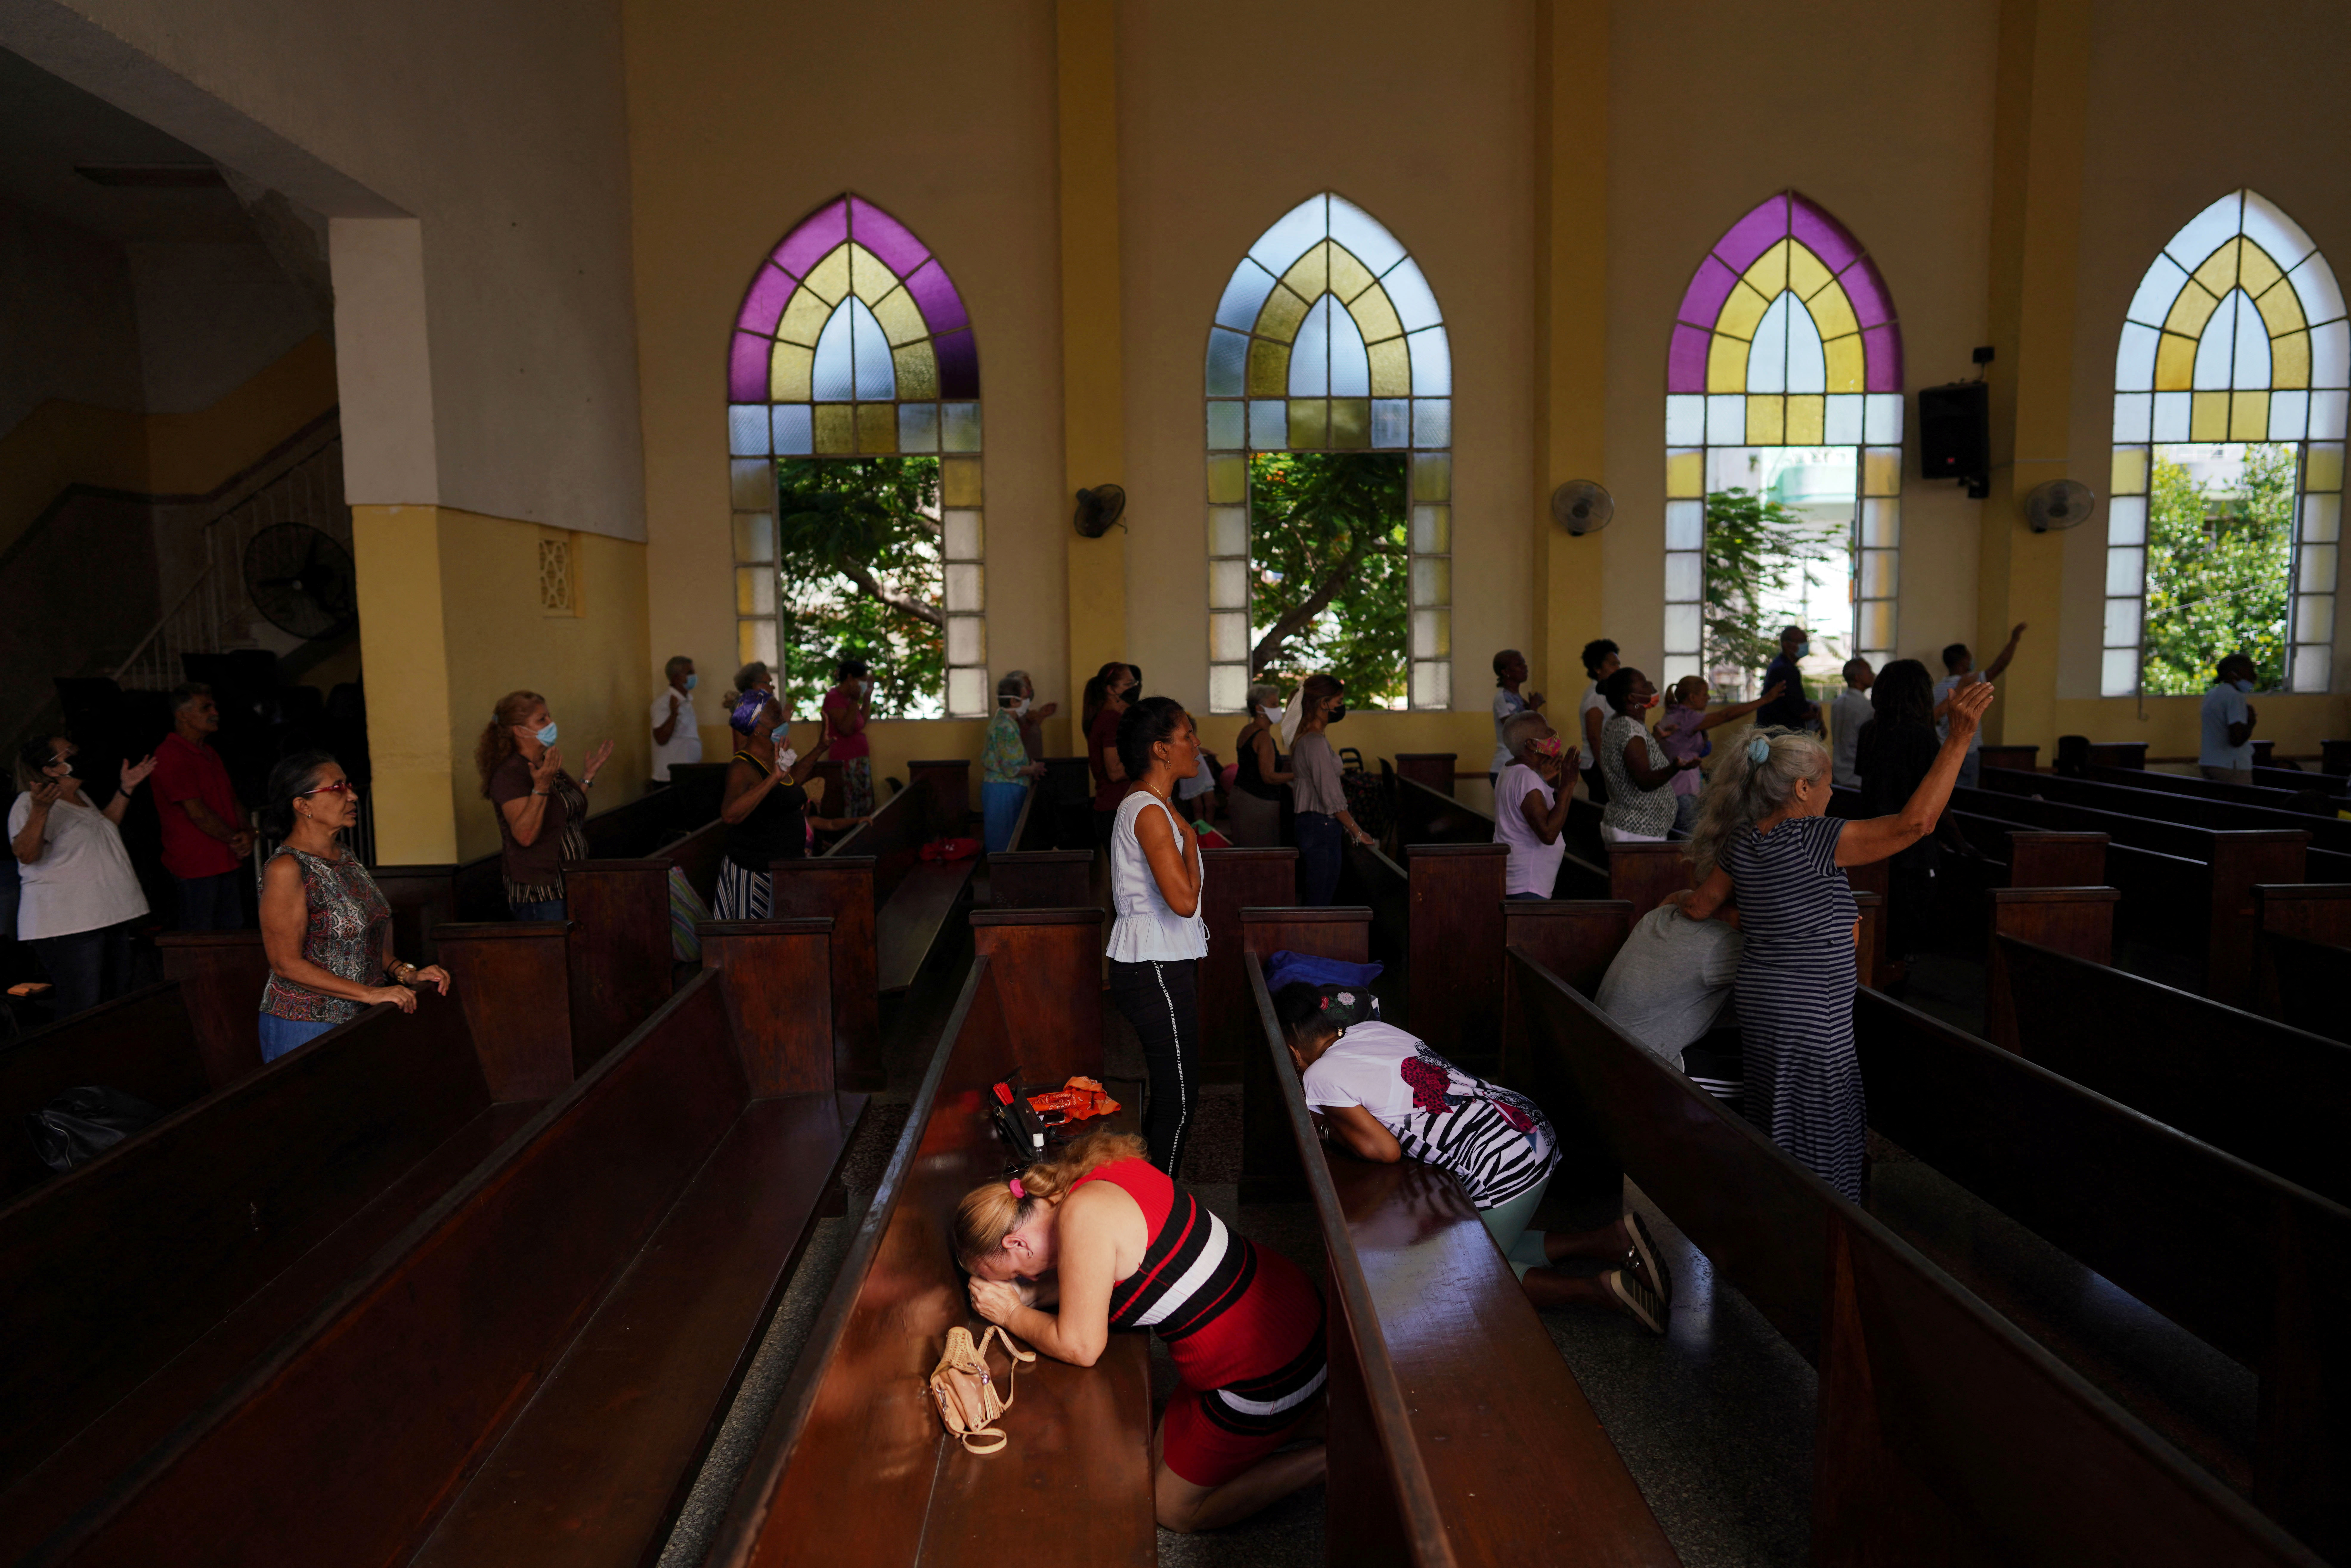 Worshippers react during a service at a Methodist Church in Havana